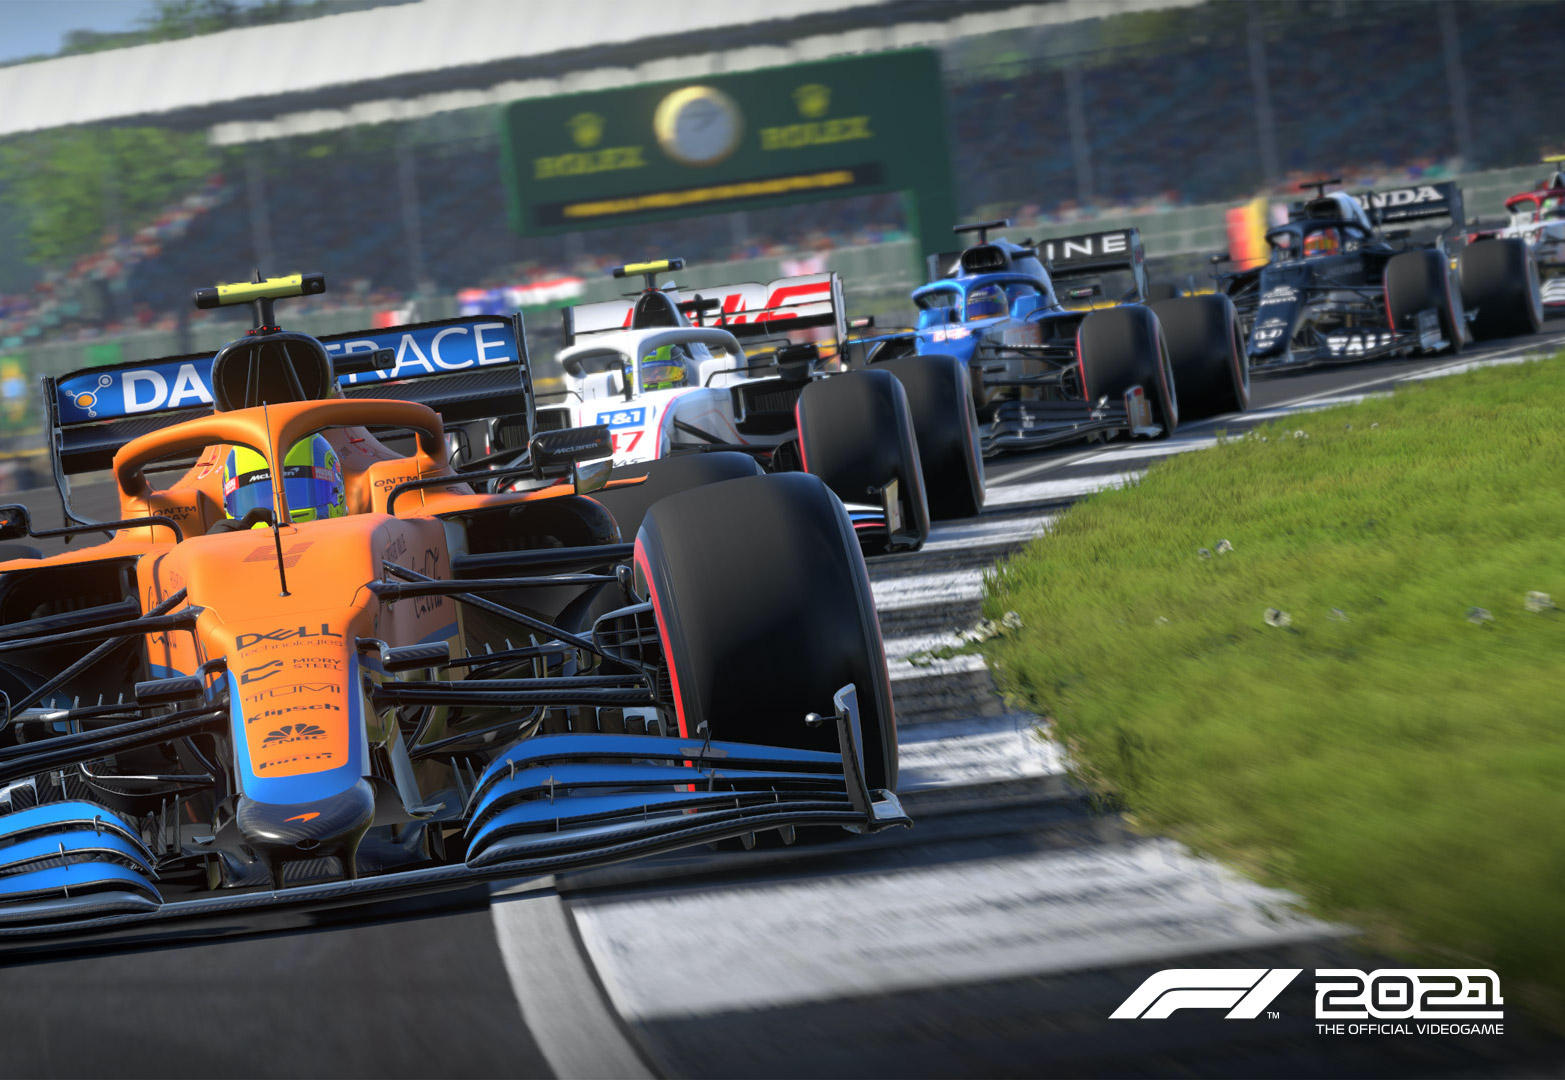 F1 2021 is free to play on PC and consoles this weekend